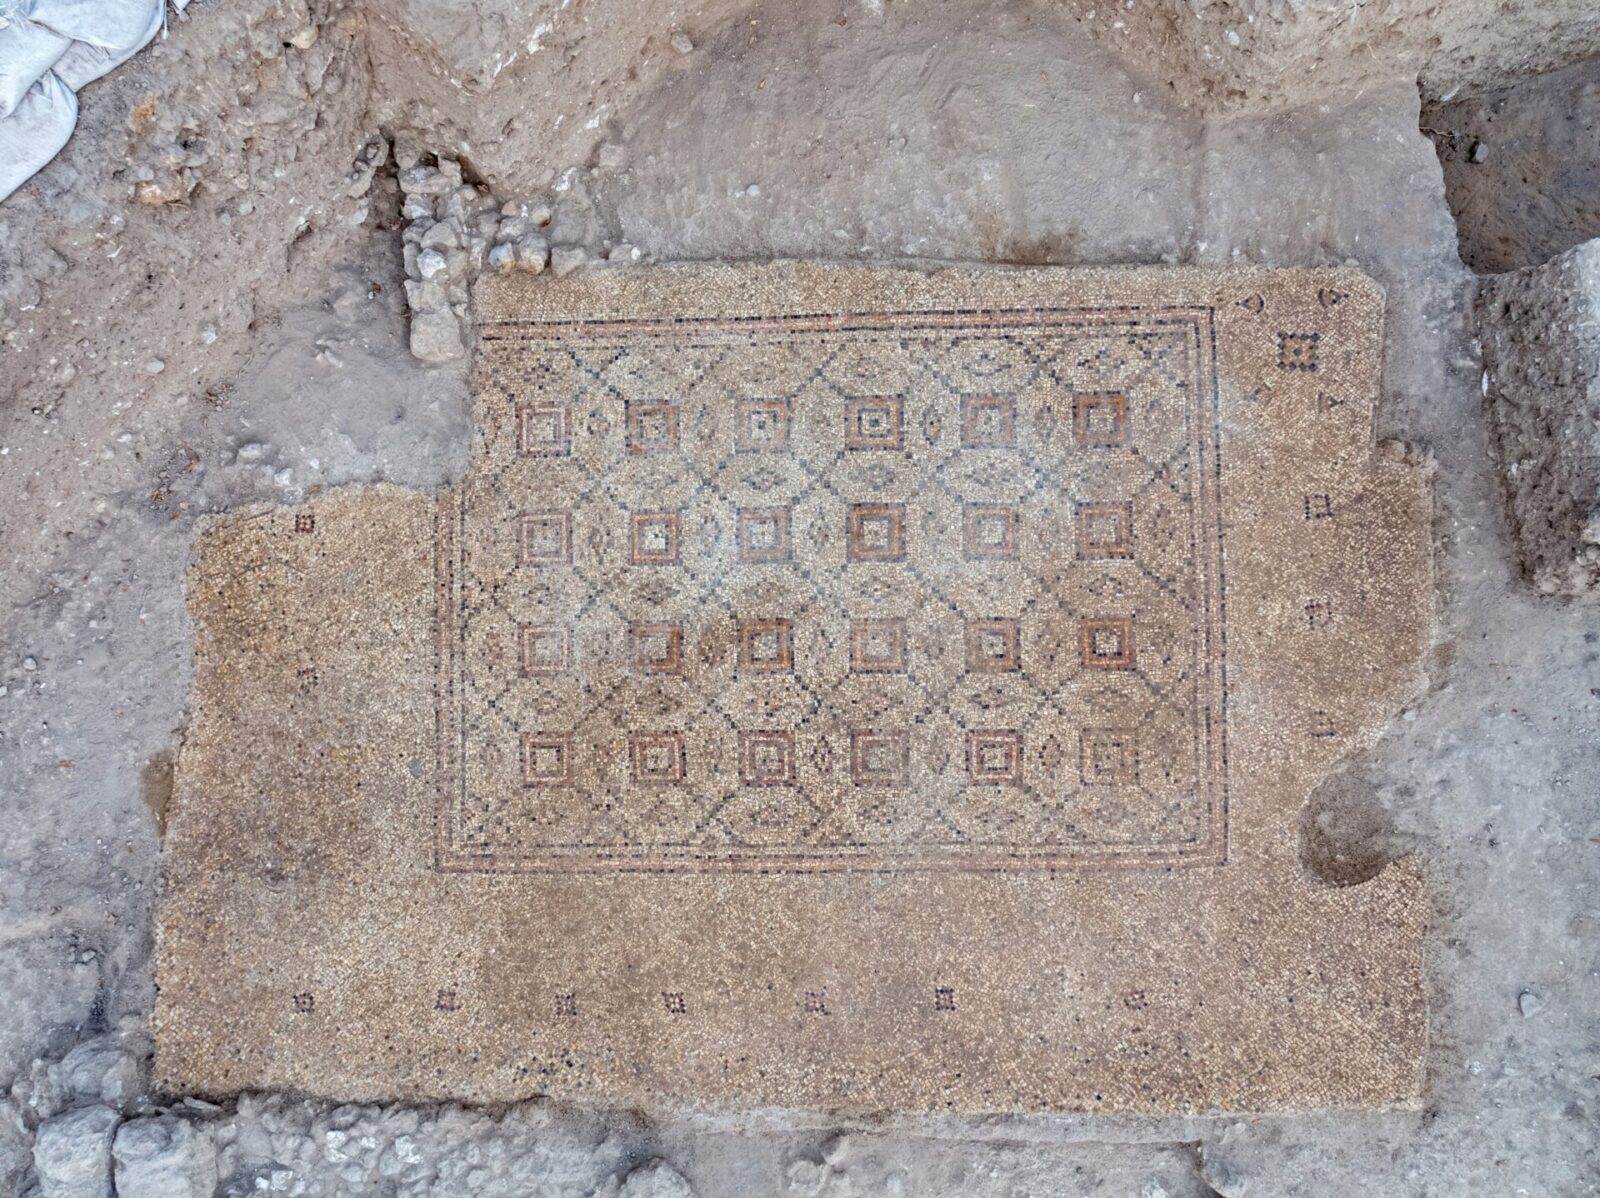 The 1,600 year old mosaic discovered near Tel Yavne. Photo by Assaf Peretz, Israel Antiquities Authority